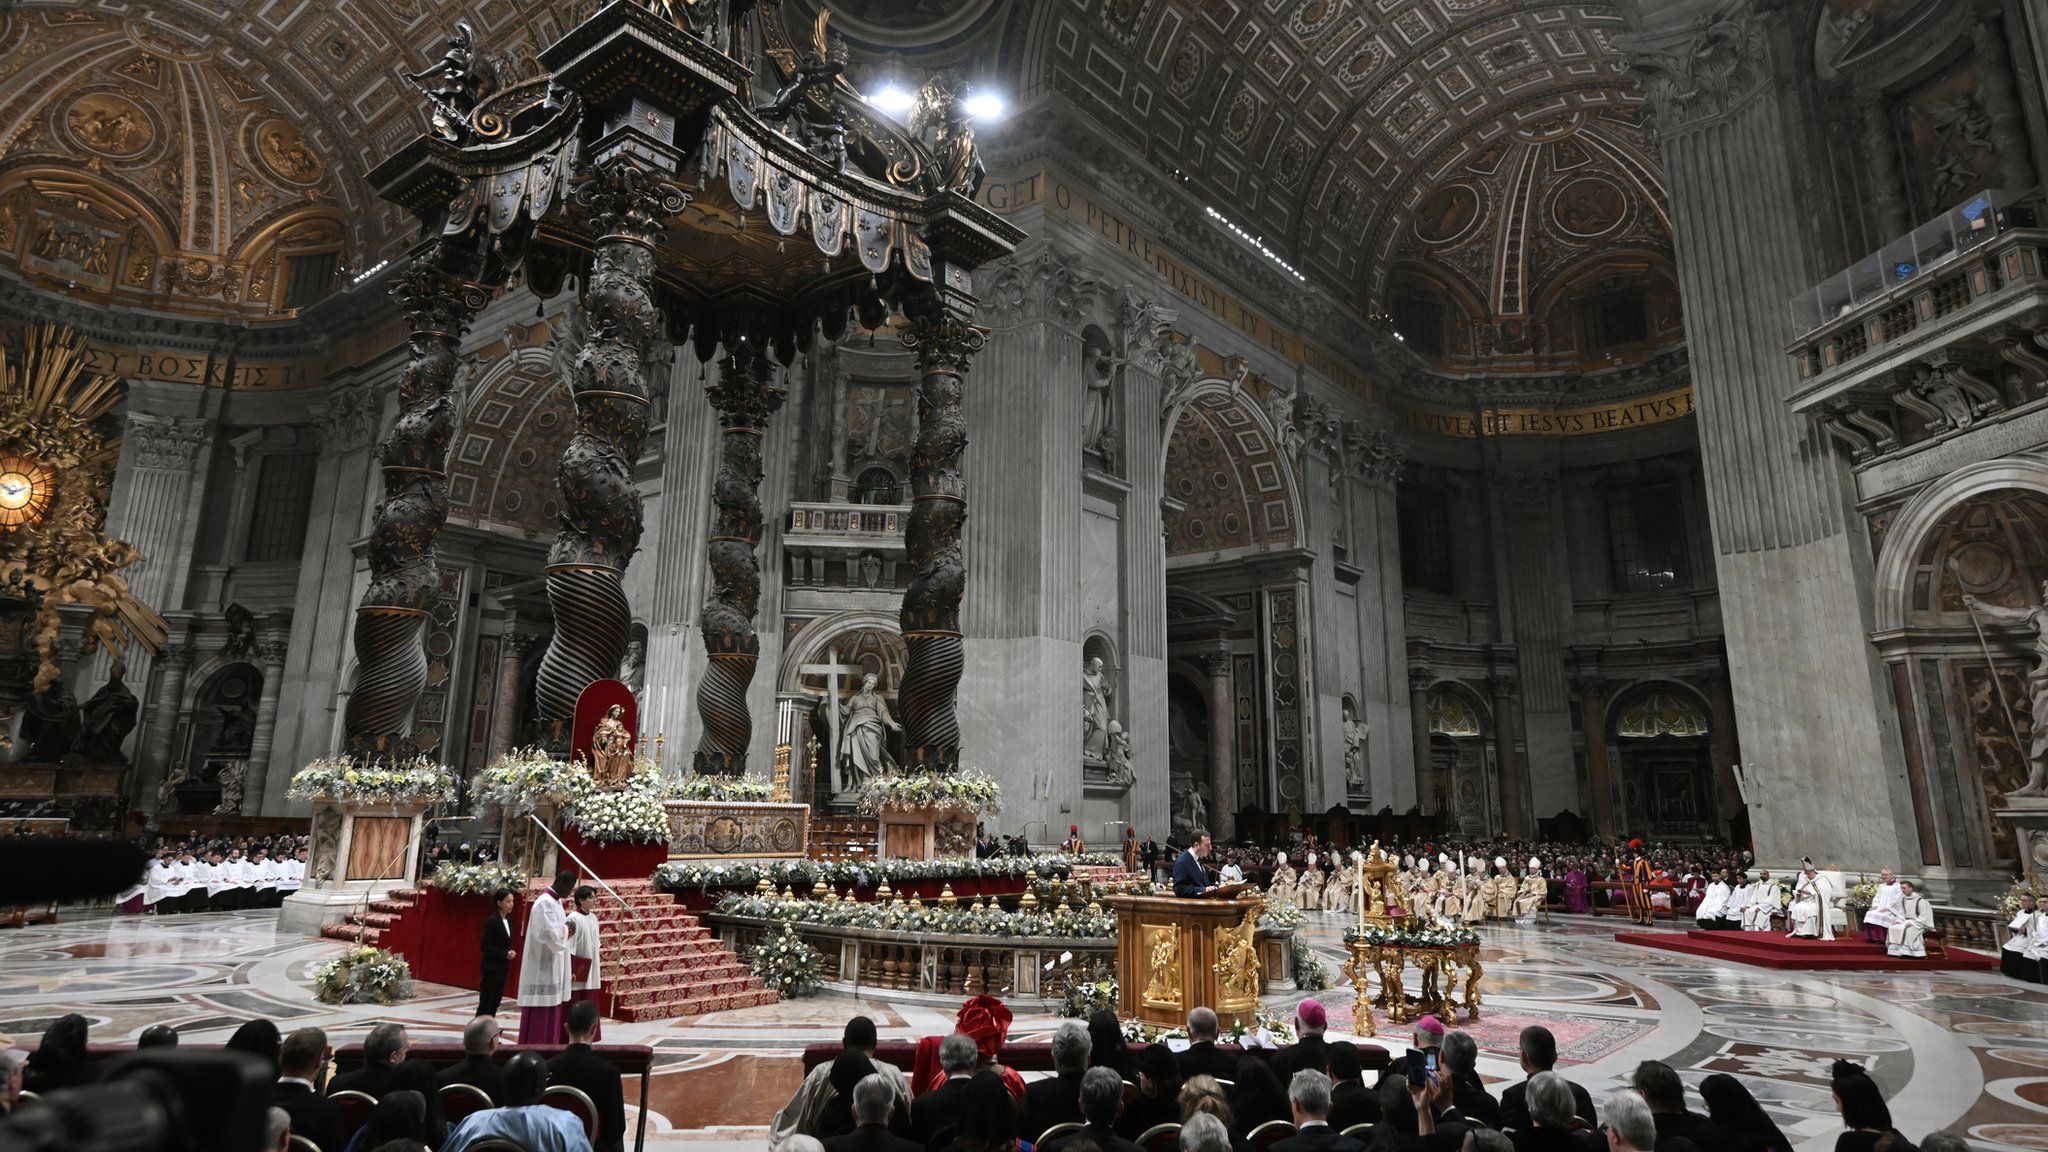 Pope Francis presides the Christmas Eve mass at St. Peter's Basilica in the Vatican